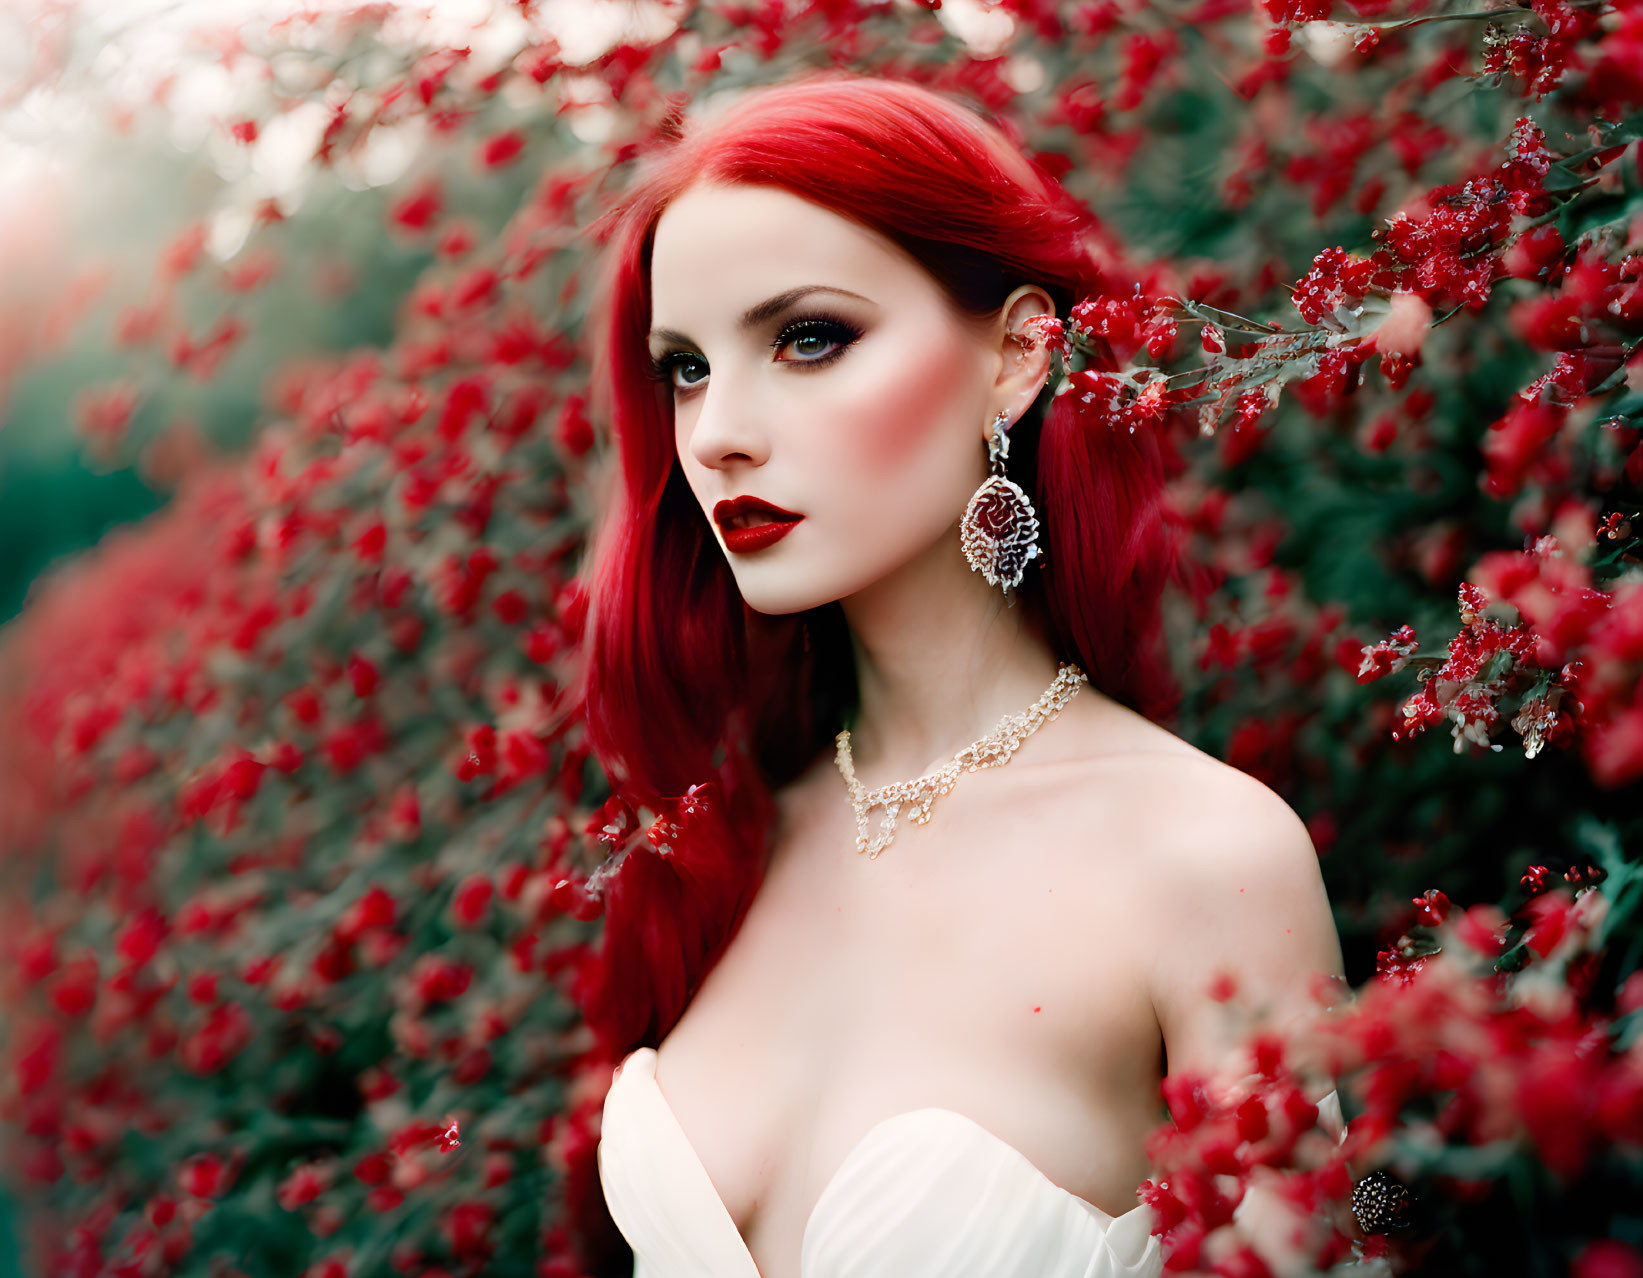 Striking red-haired woman in white dress among vibrant red blossoms